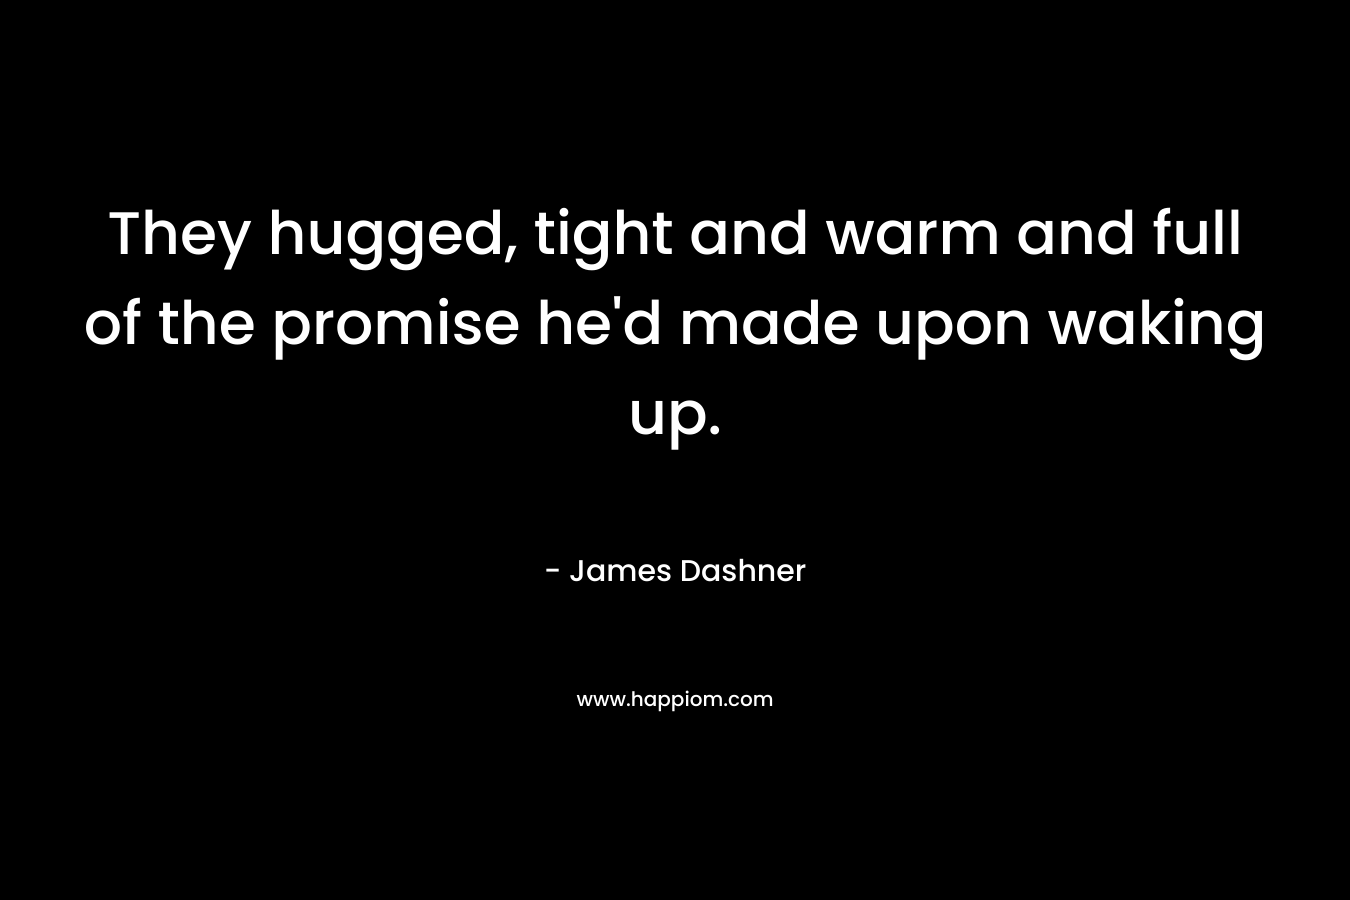 They hugged, tight and warm and full of the promise he’d made upon waking up. – James Dashner